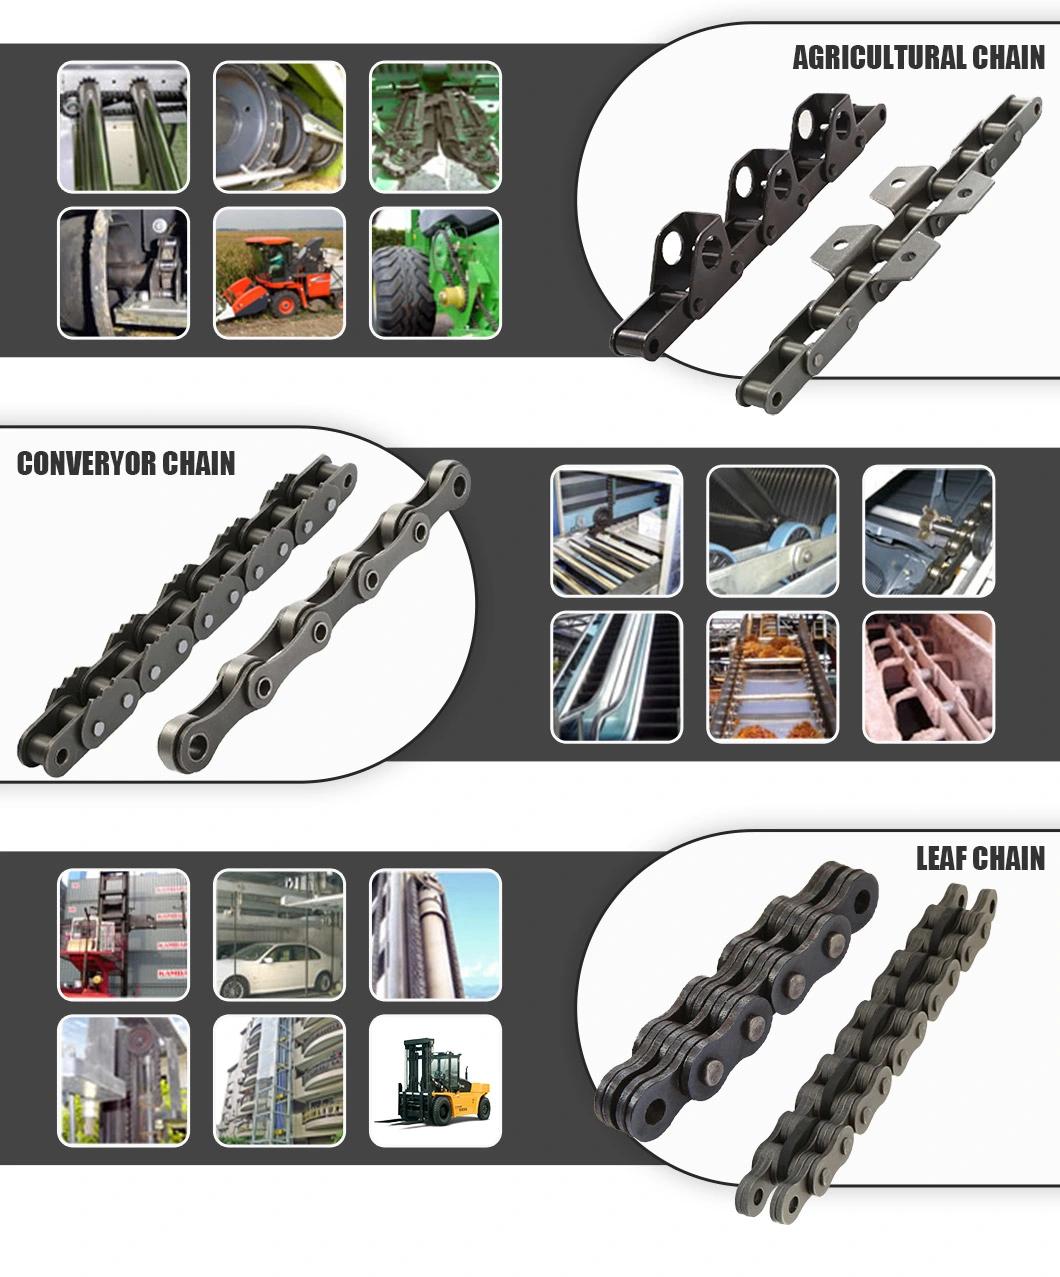 Conveyor Heavy Duty Stainless Steel Agricultural Chain with Attachment